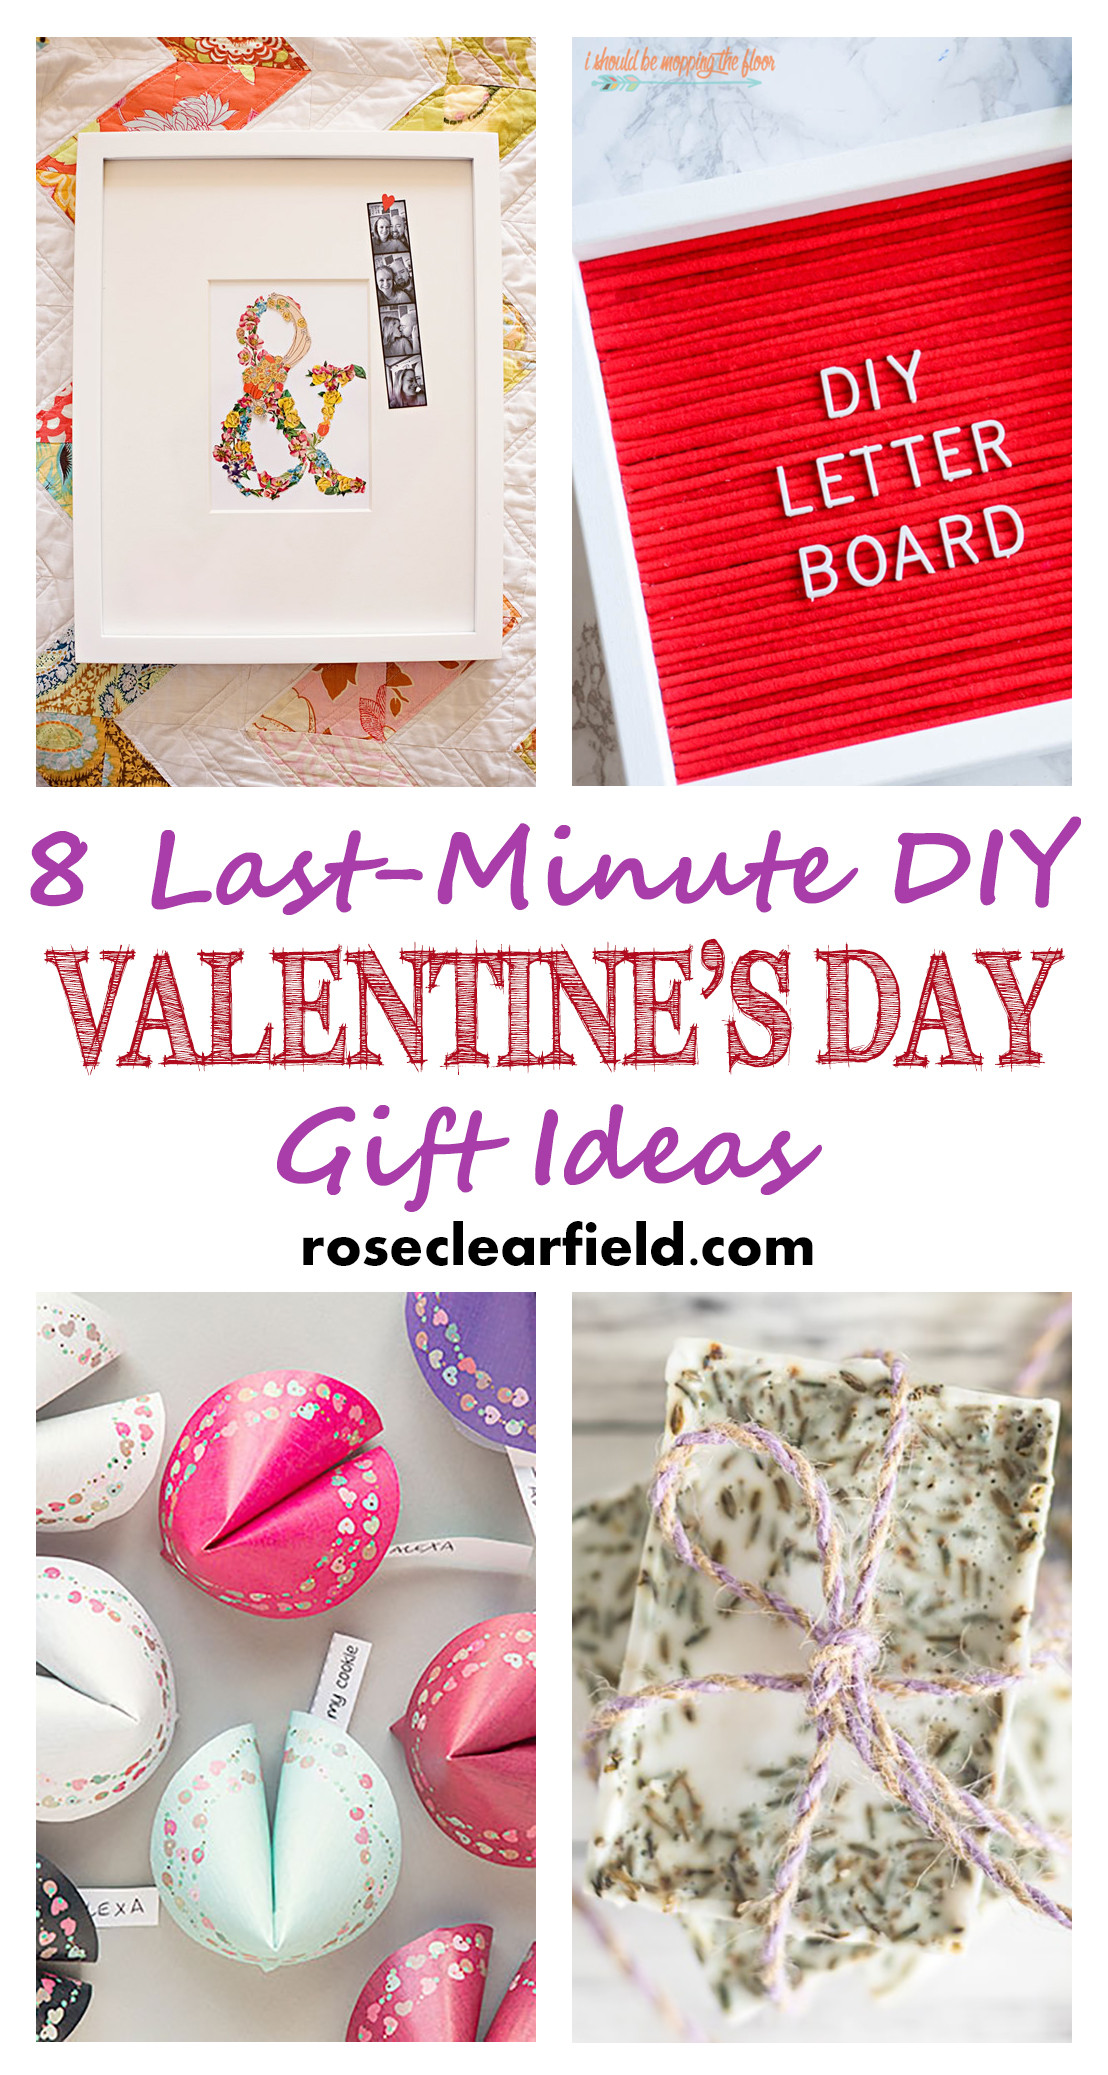 Last Minute Valentines Gift Ideas
 Last Minute DIY Valentine s Day Gift Ideas • Rose Clearfield